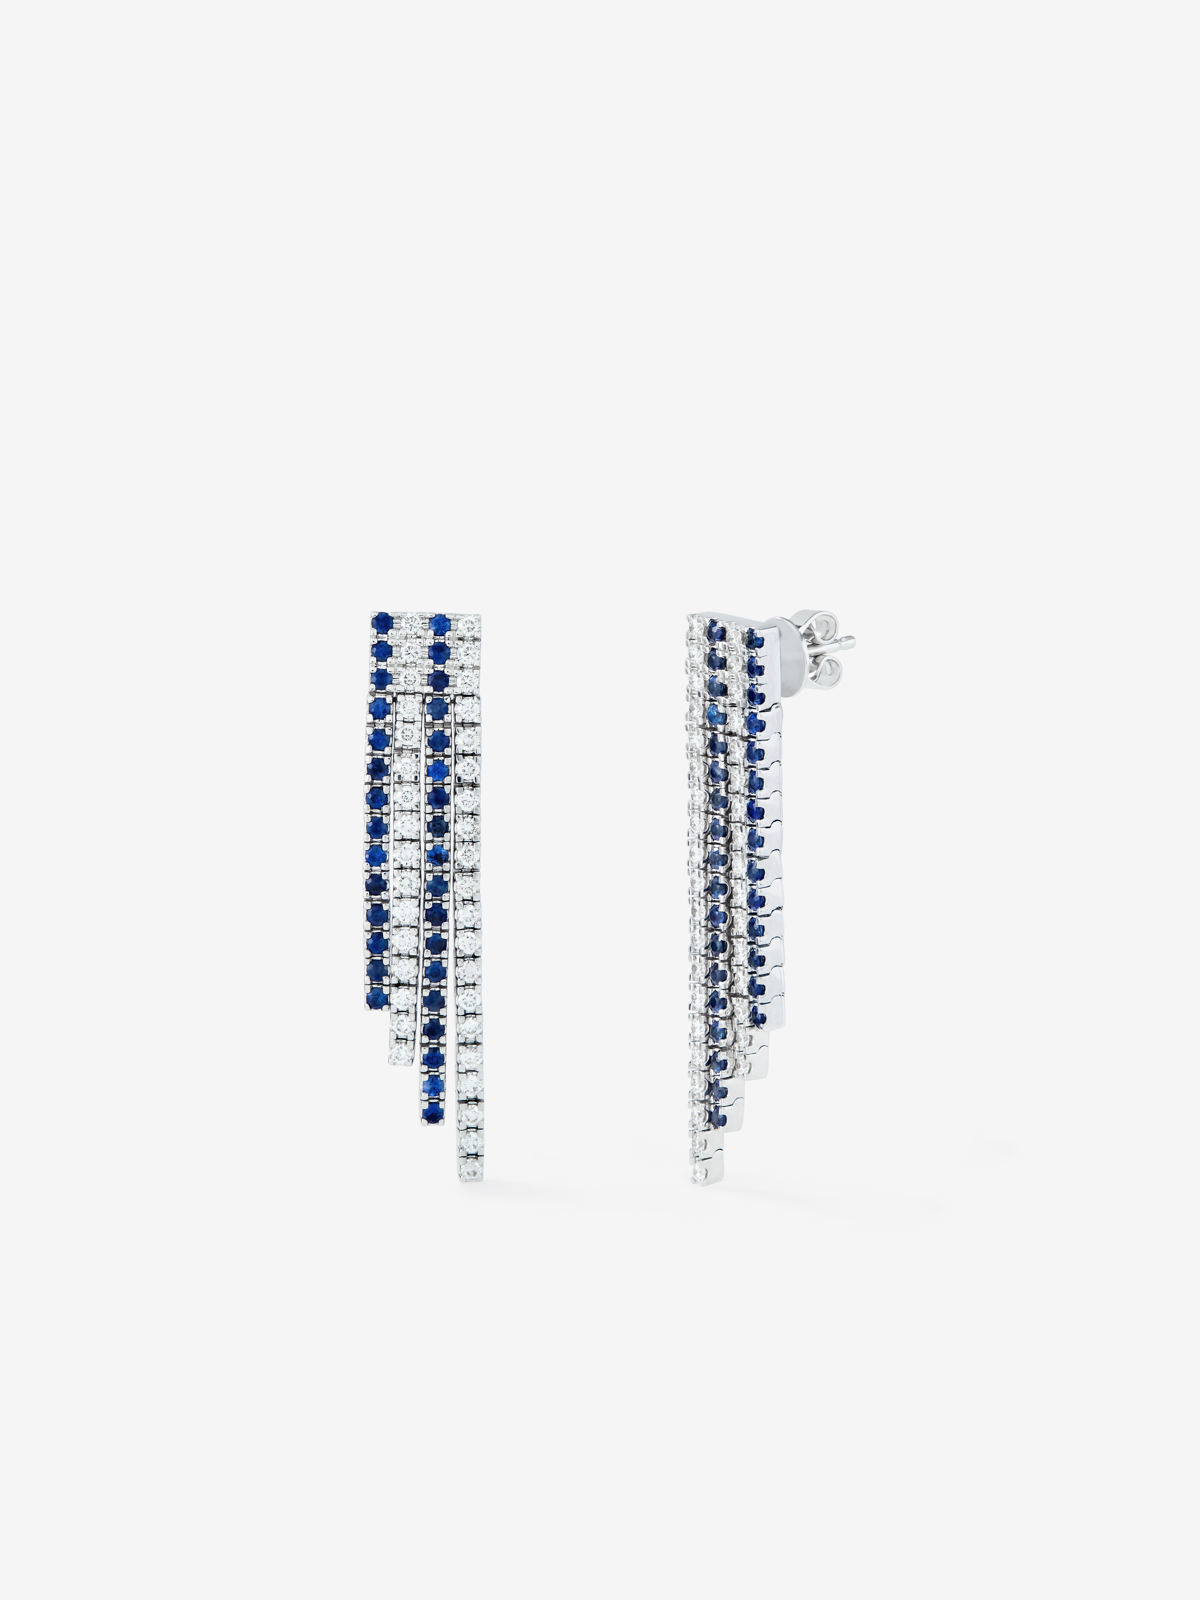 18K white gold pendant earrings with diamond and sapphire